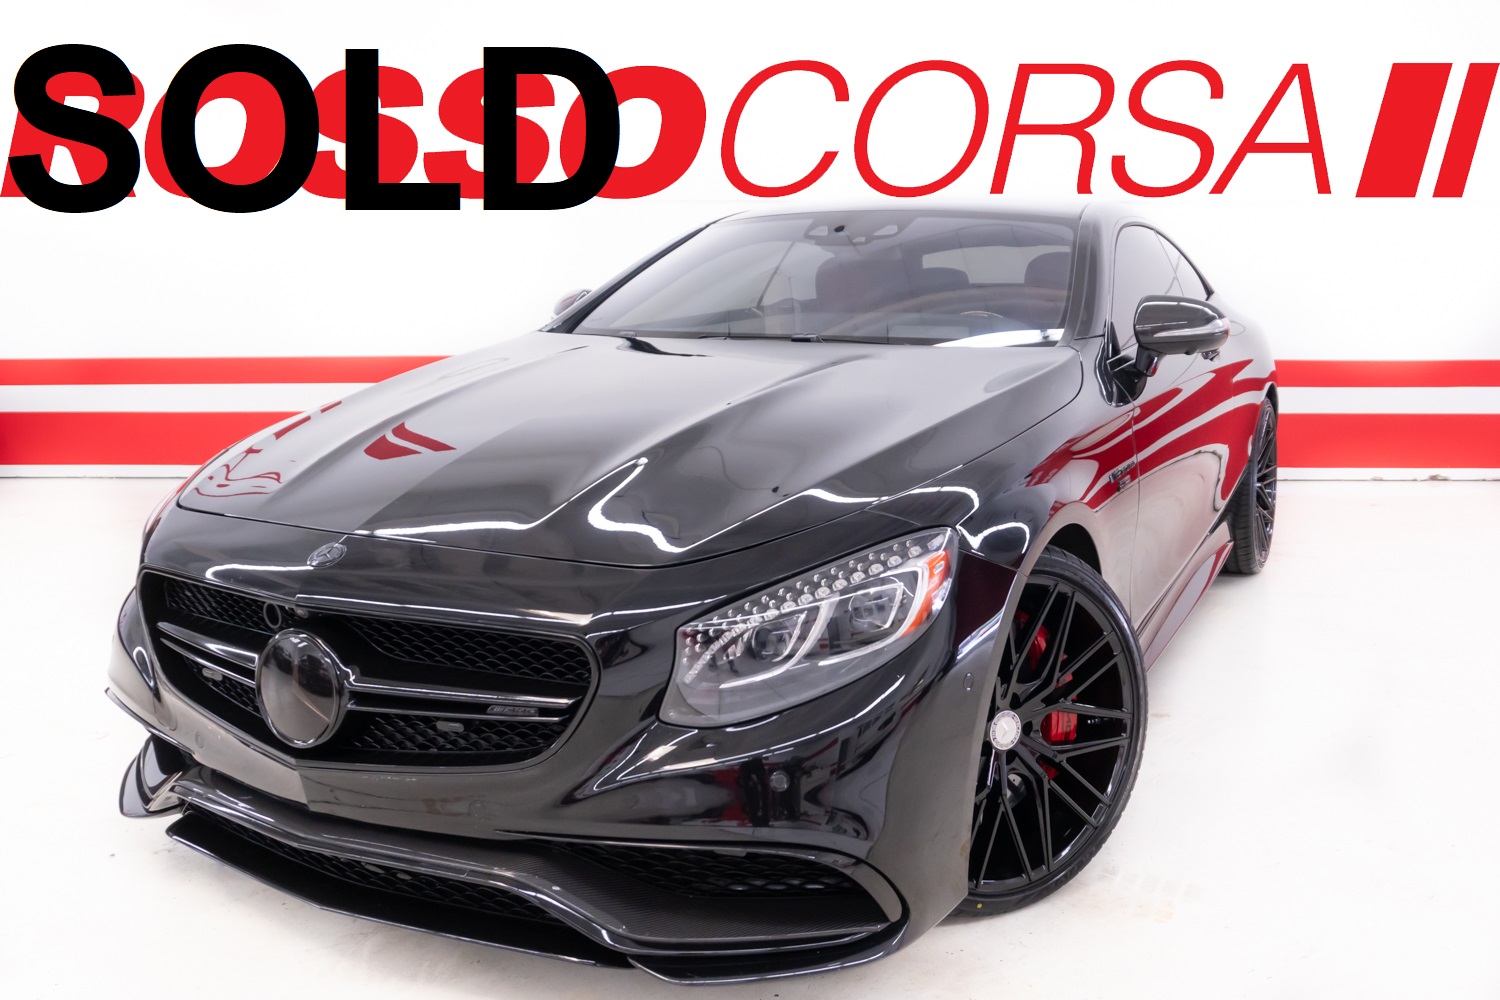 2015 Mercedes-Benz S65 AMG Coupe CUSTOM ($265K MSRP)